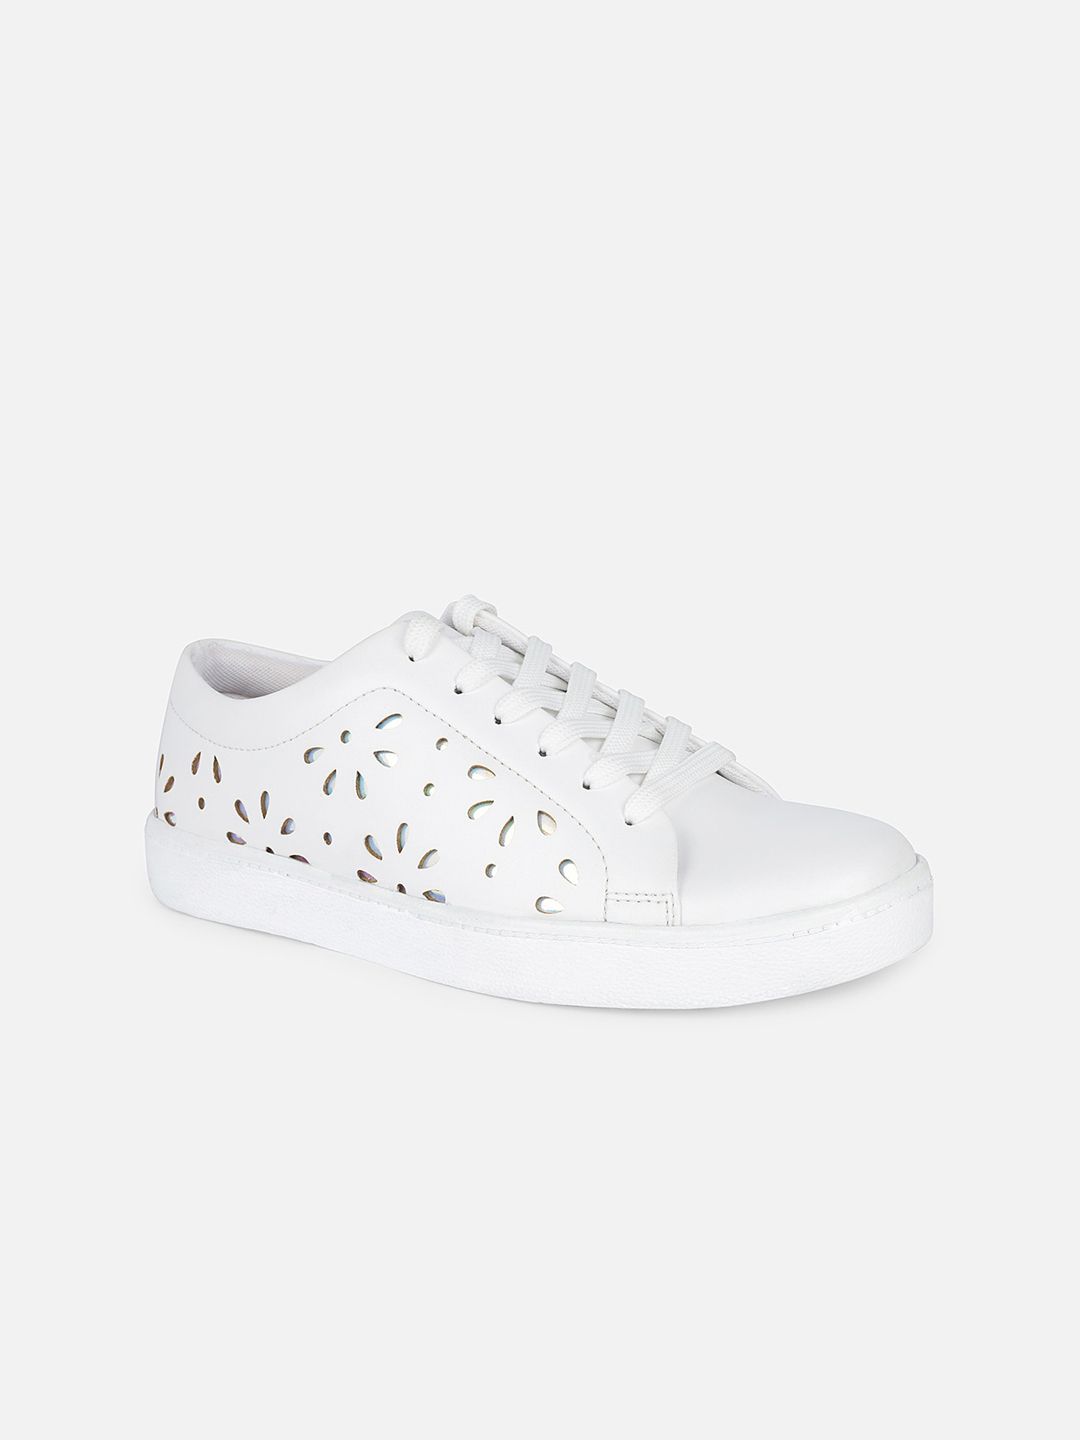 Tokyo Talkies Women Textured Comfort Insole Basics Sneakers With Laser Cuts Price in India